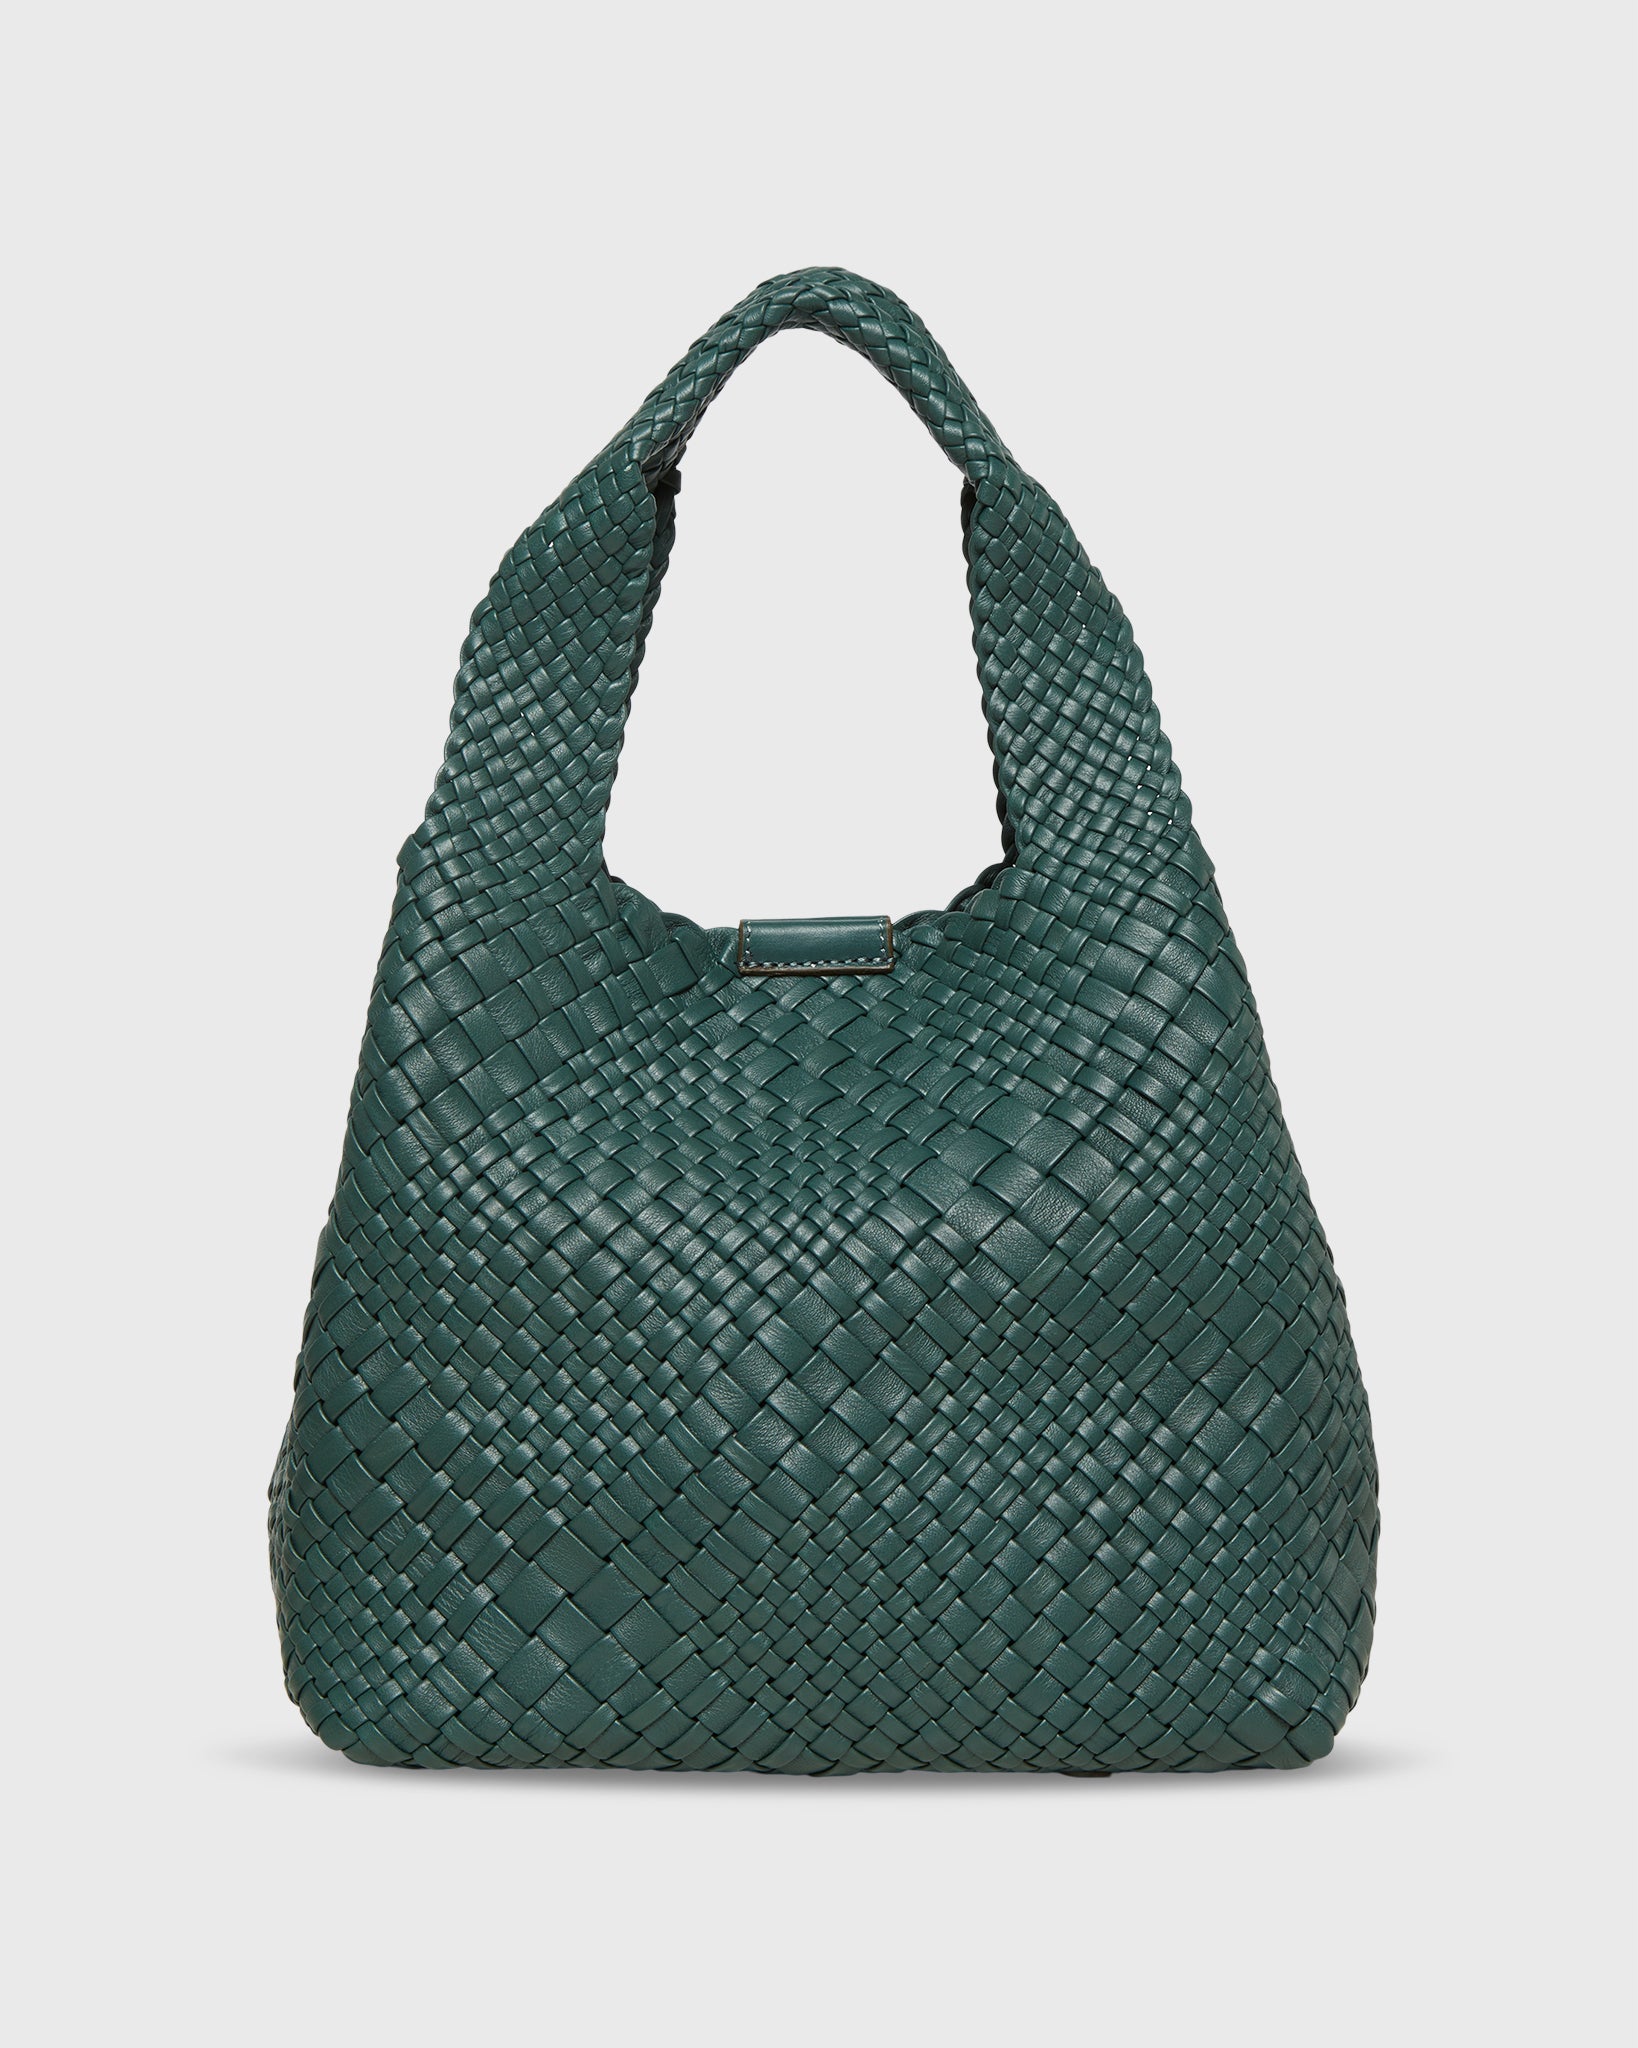 Small Mercato Handwoven Tote in Moss Leather